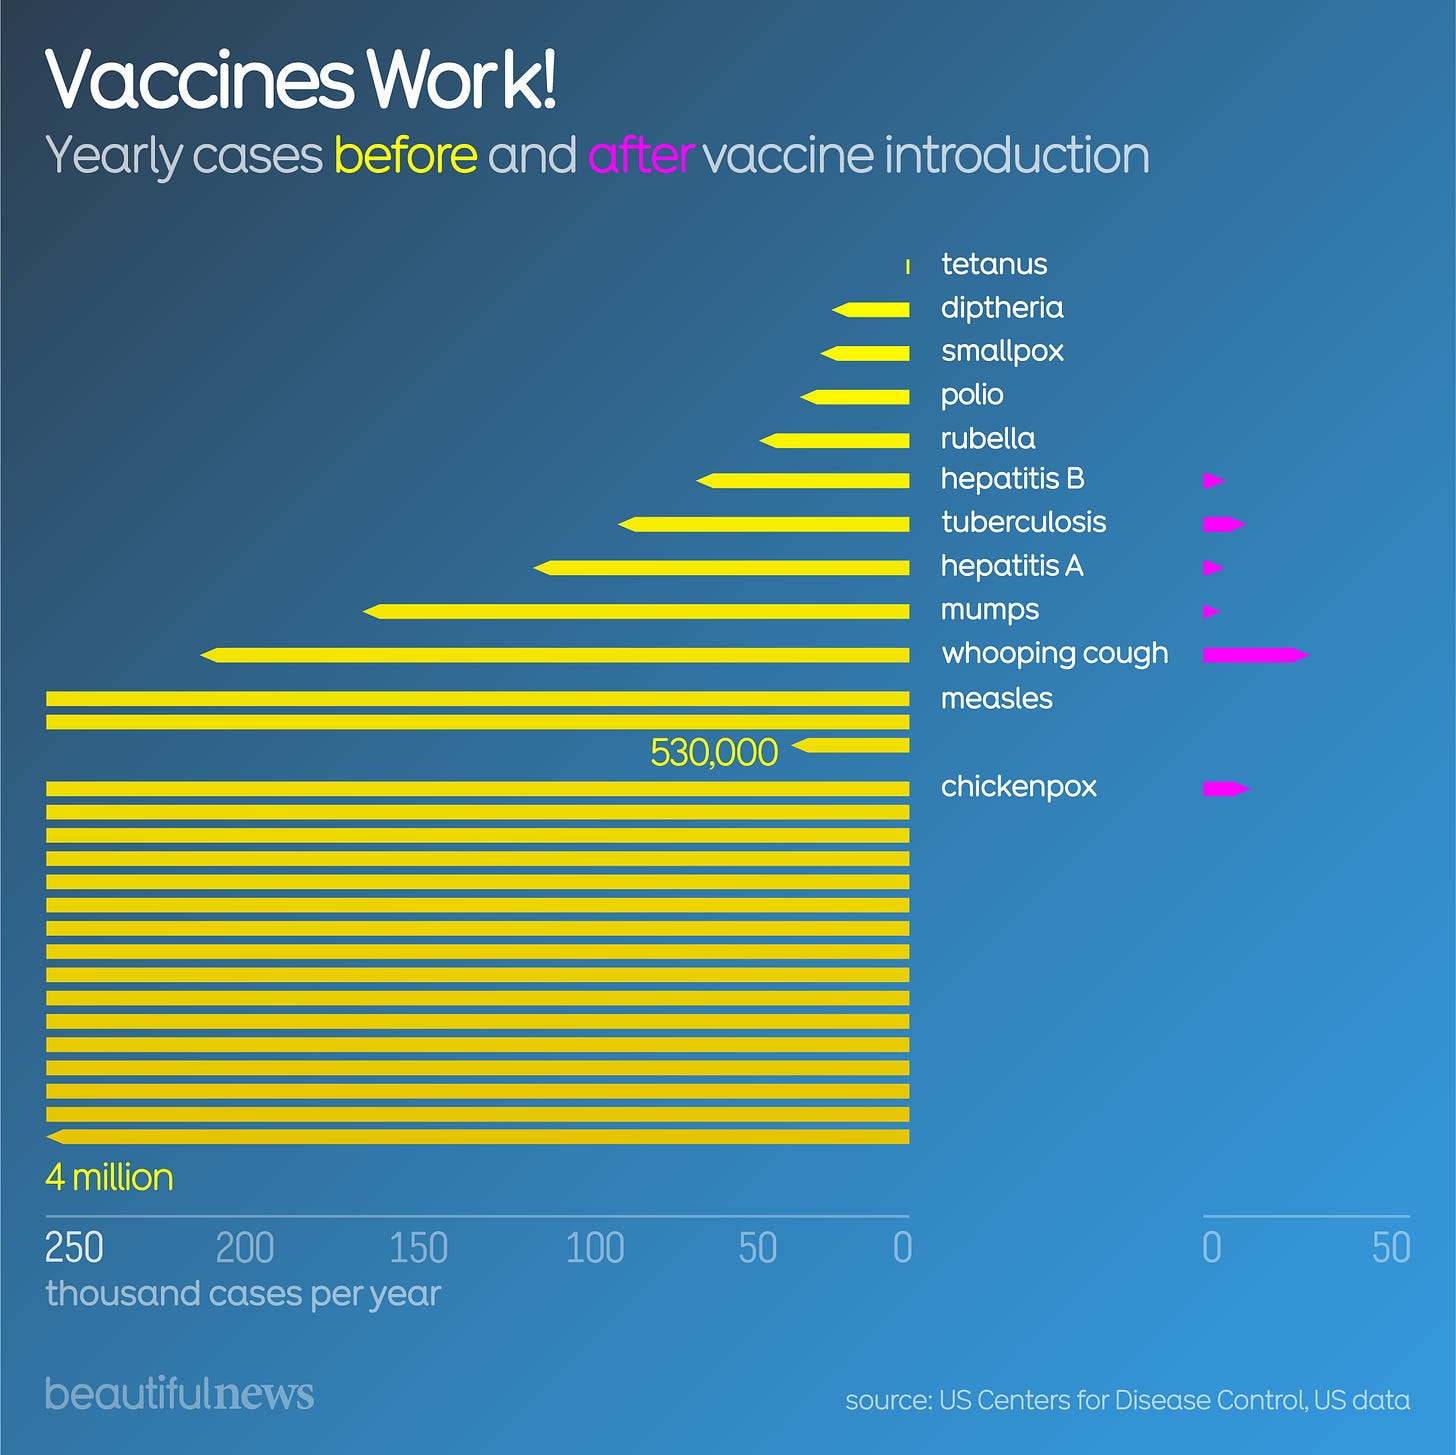 Diagram shows the yearly cases for diseases like polio, measles or chickenpox once before and once after the introduction of vaccines. In the case of measles the rate dropped from 530.000 before to zero now. Across all diseases listed the rates dropped significantly.  